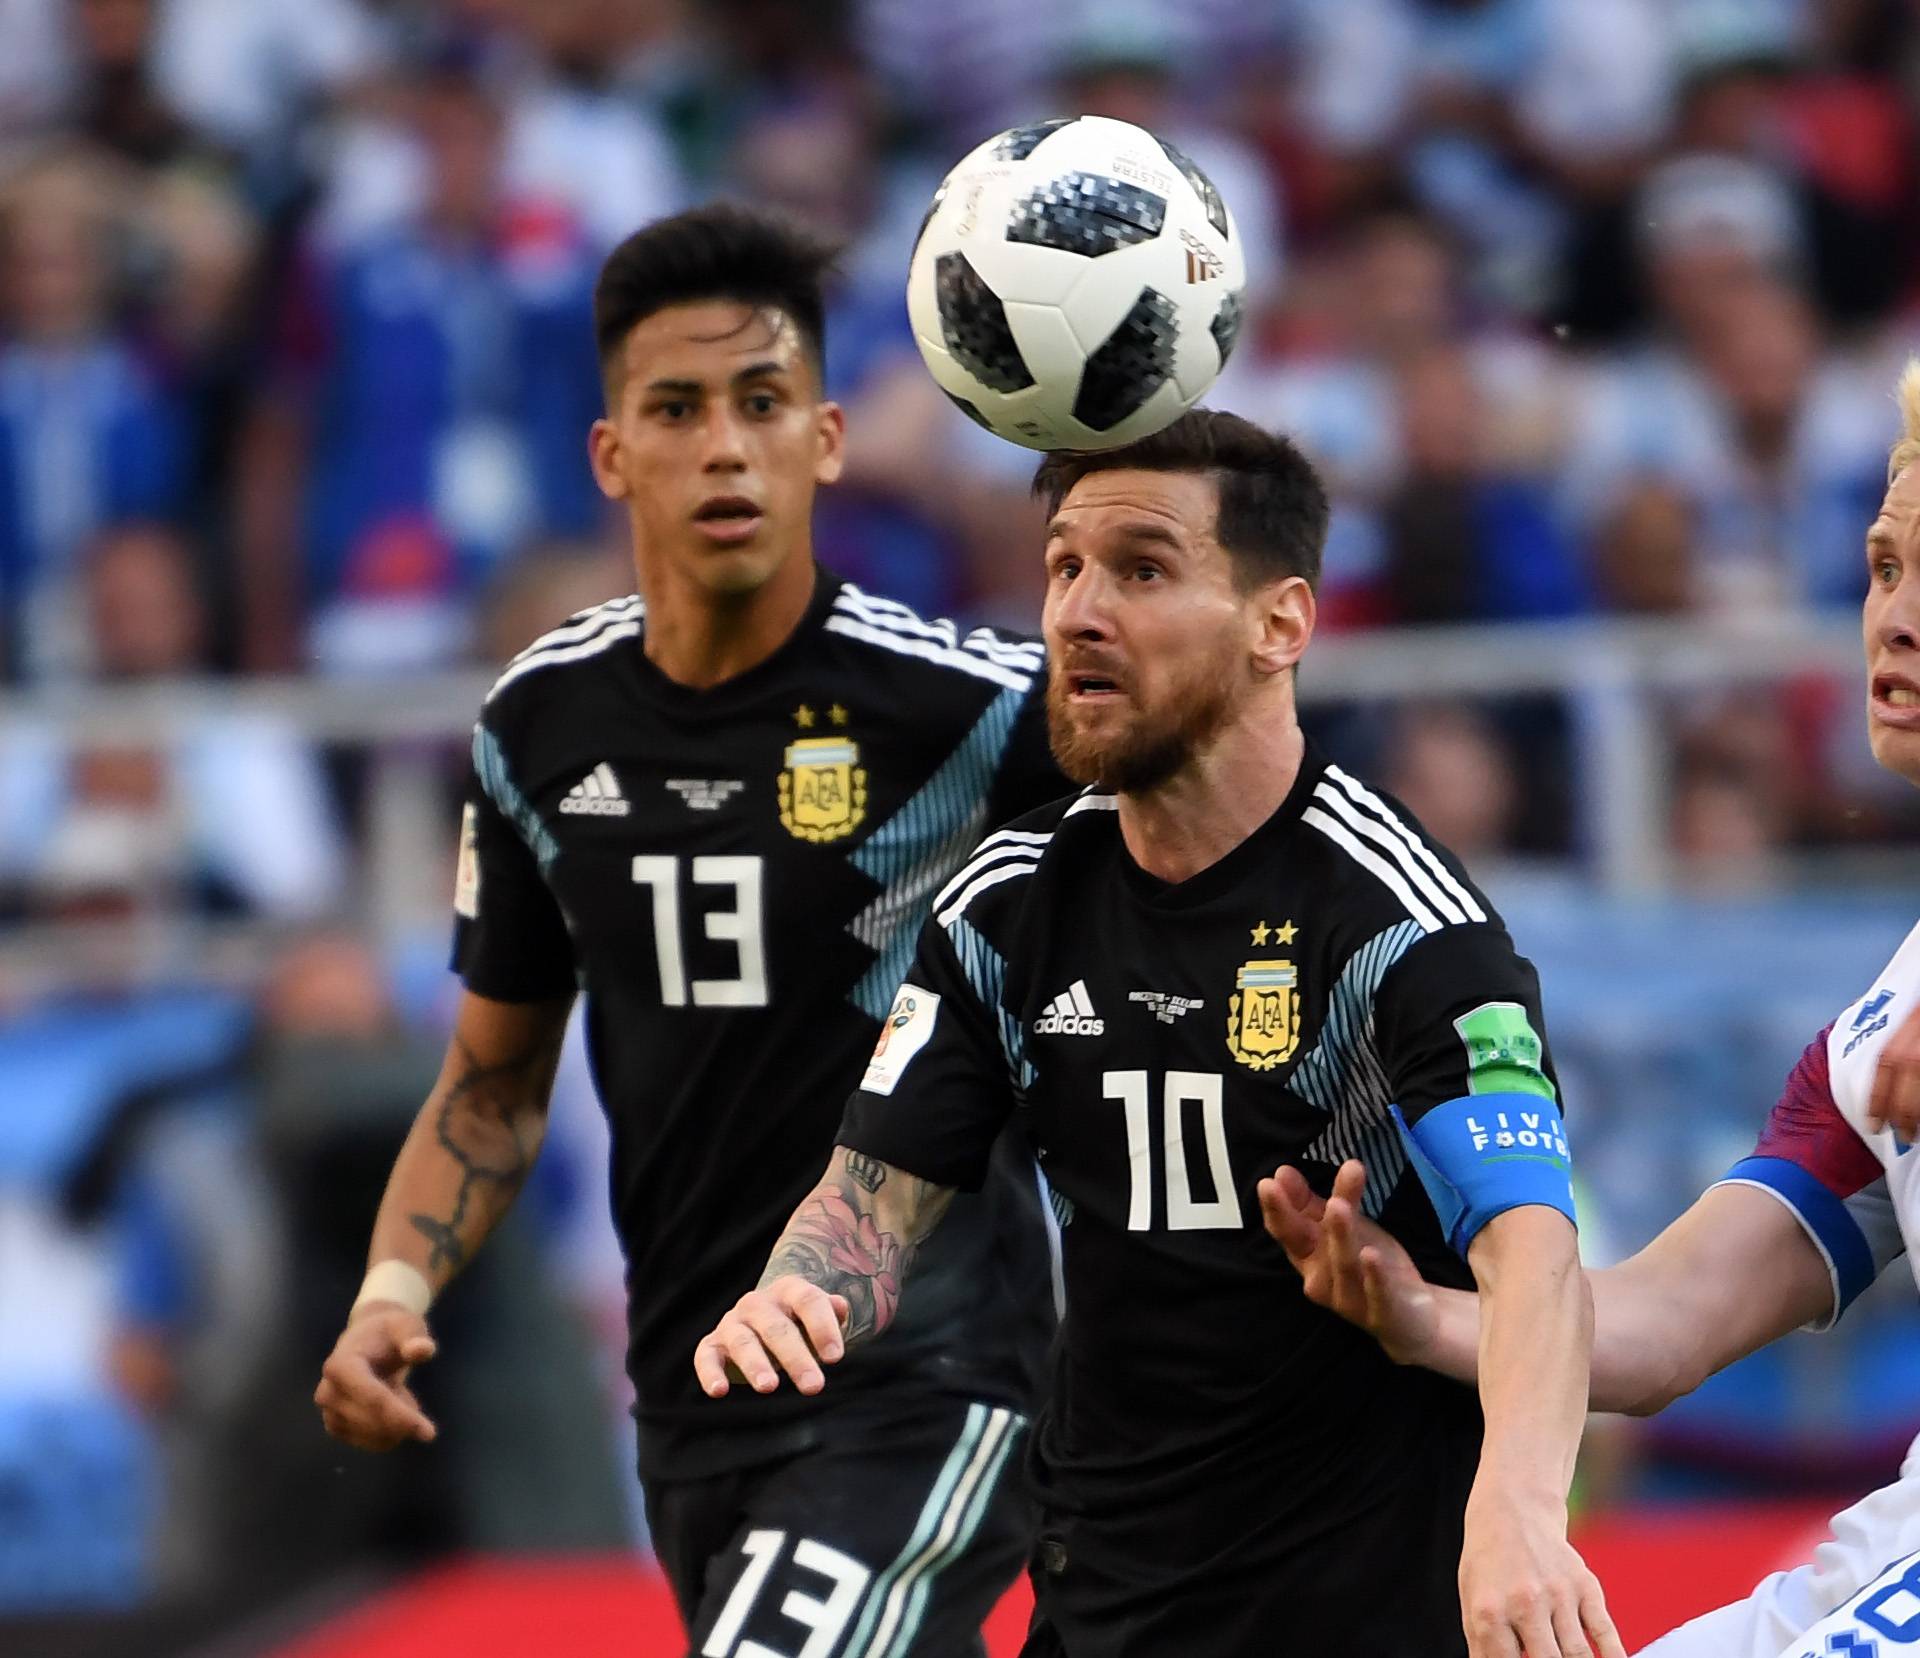 FIFA World Cup 2018 - Argentina vs Iceland